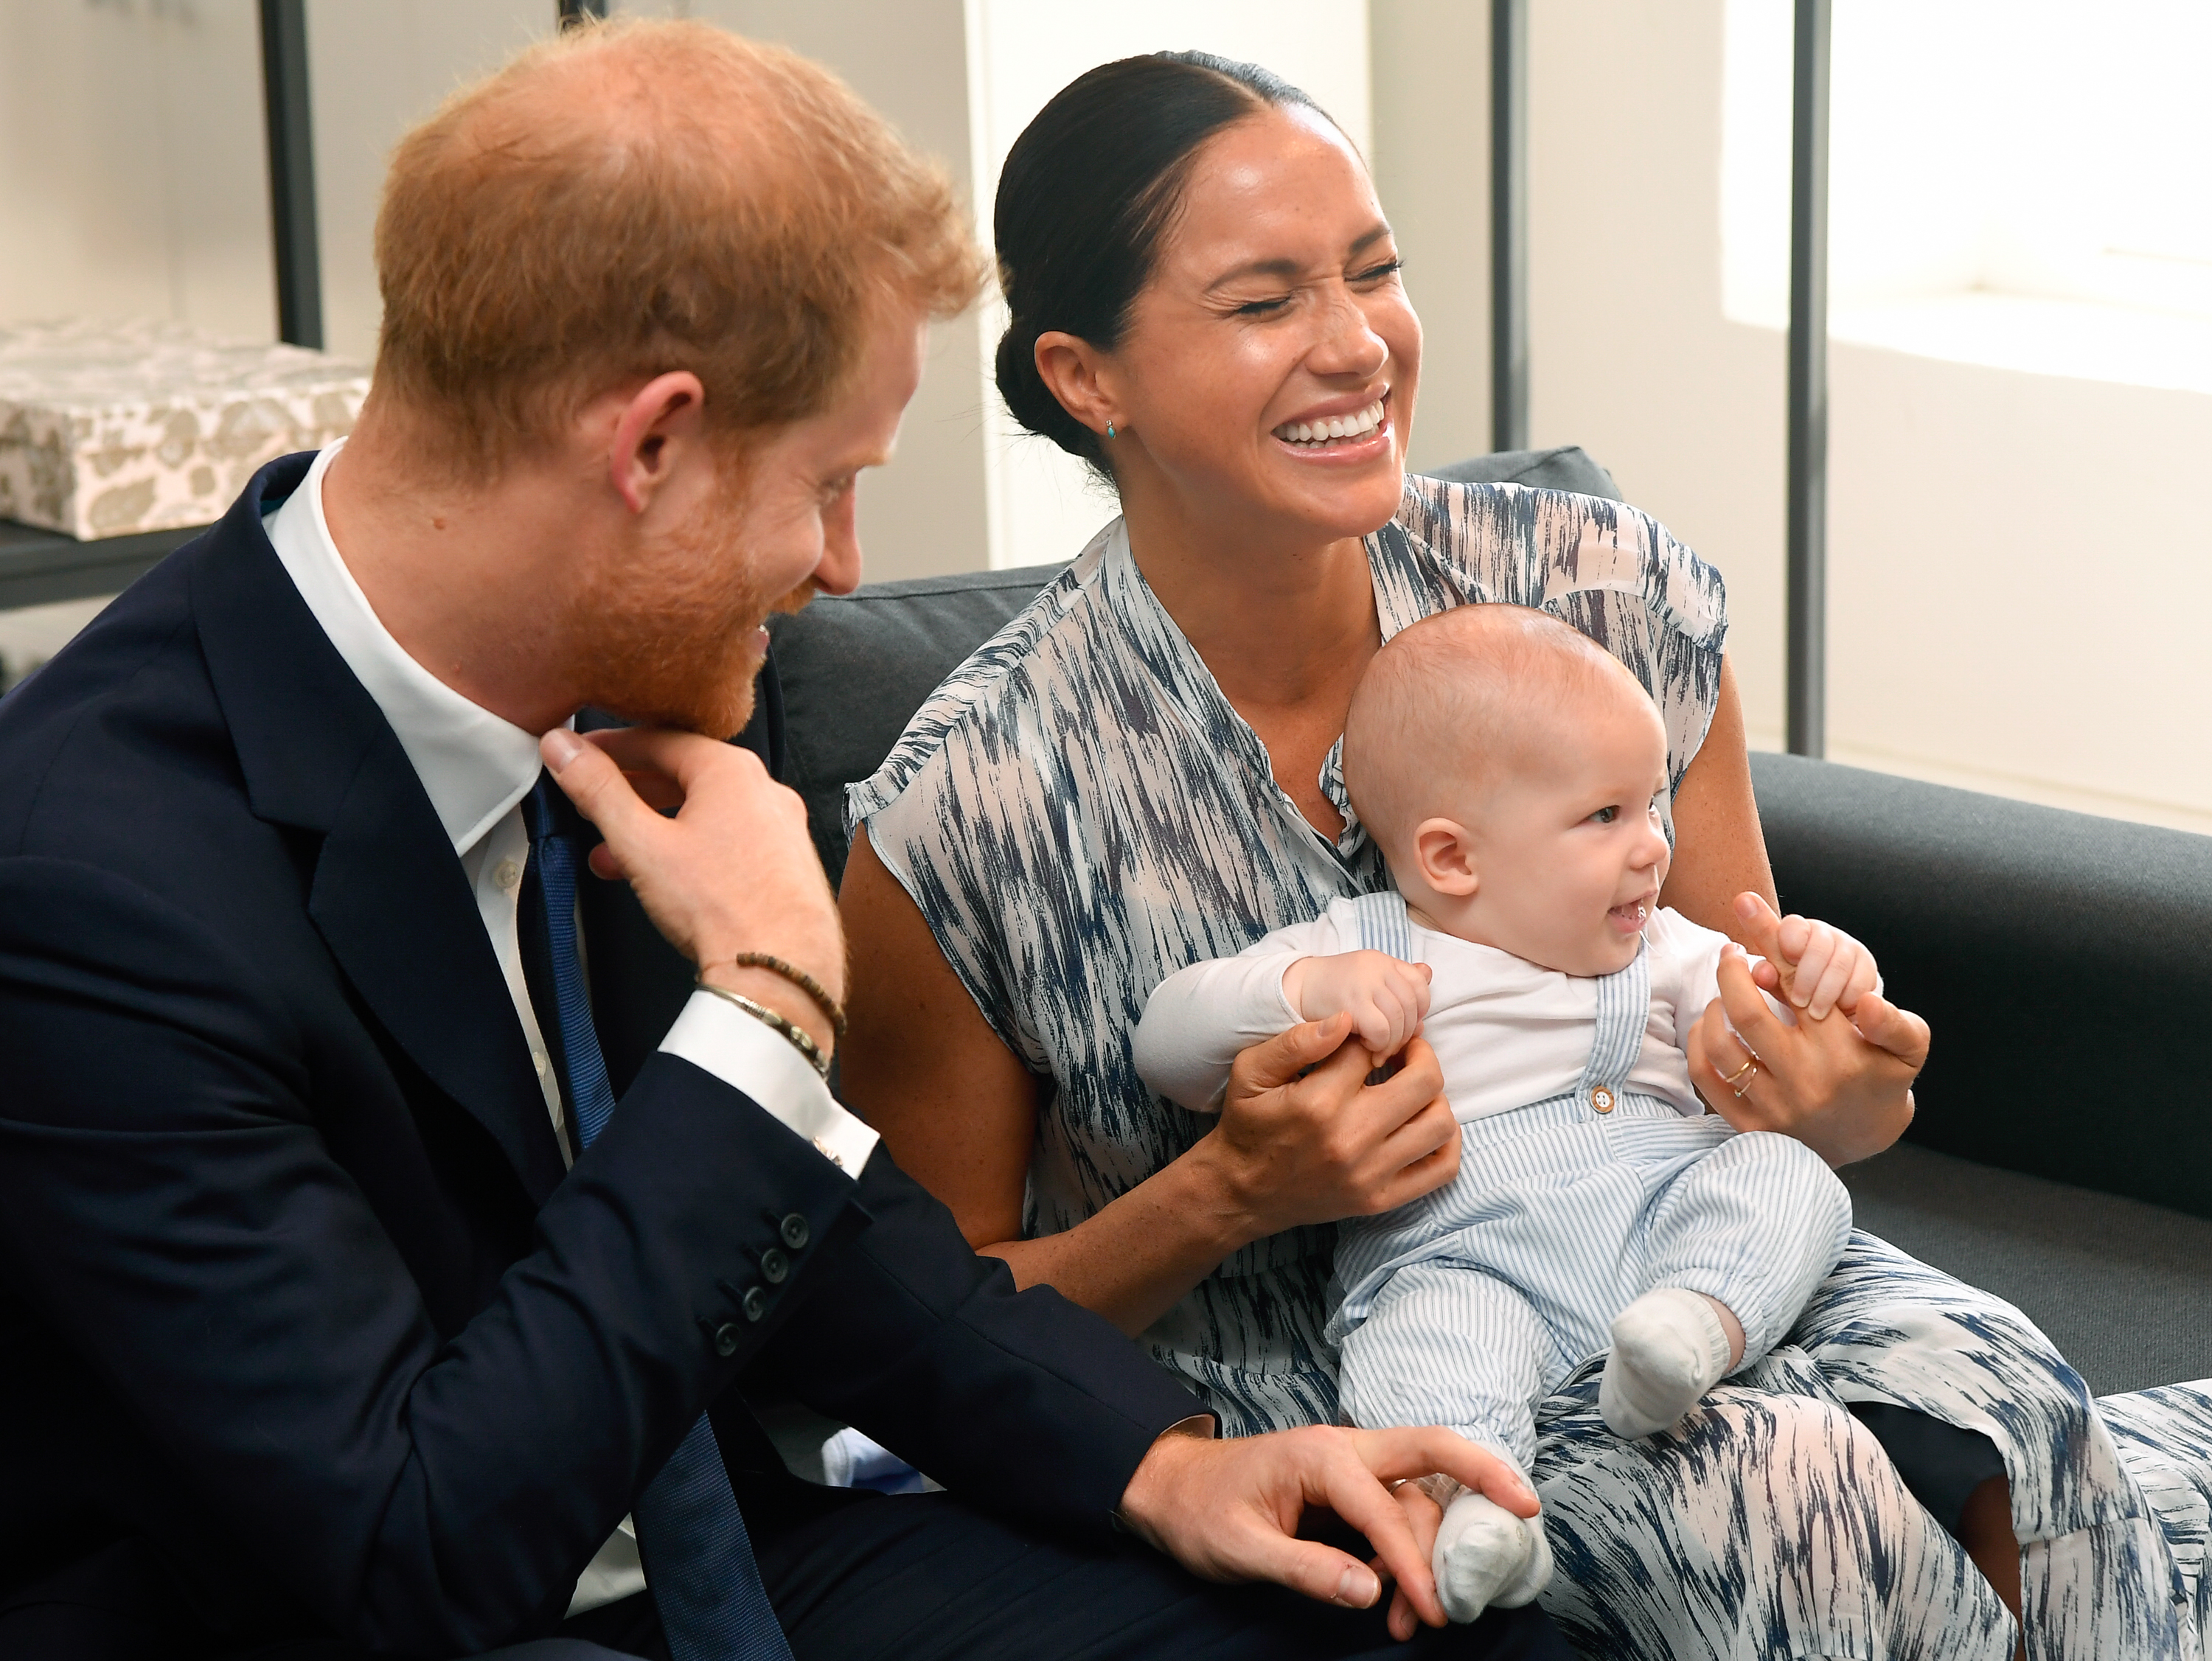 Meghan Markle, Prince Harry and their son,  Archie Mountbatten-Windsor during their royal tour of South Africa on September 25, 2019 in Cape Town, South Africa | Source: Getty Images